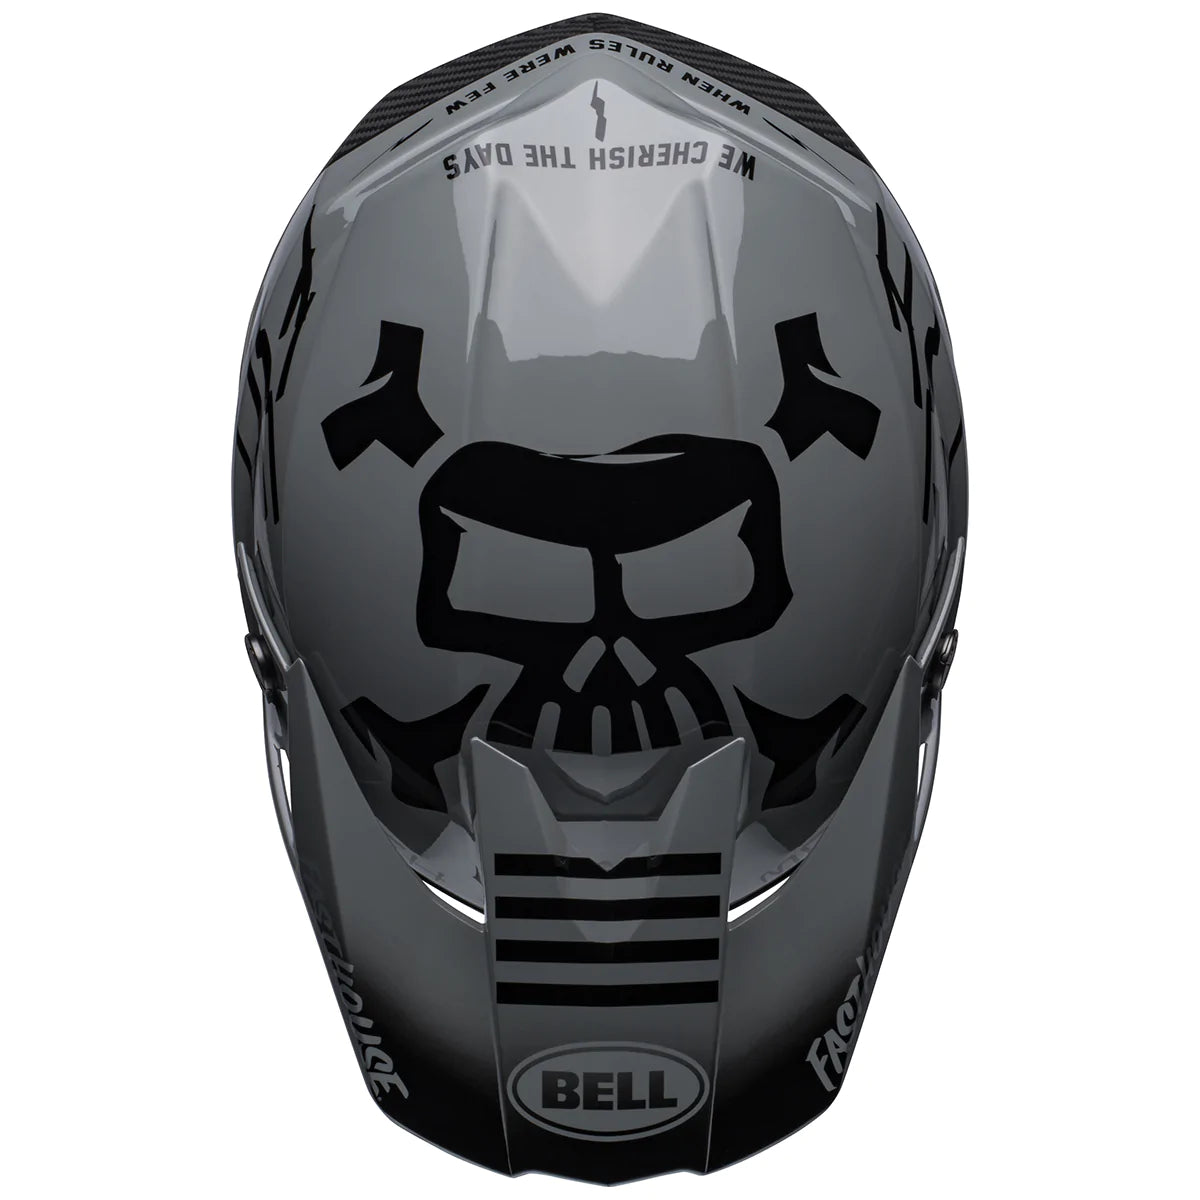 Bell Moto-10 Spherical Fasthouse Limited Edition BMF Helmet - Gray/Black